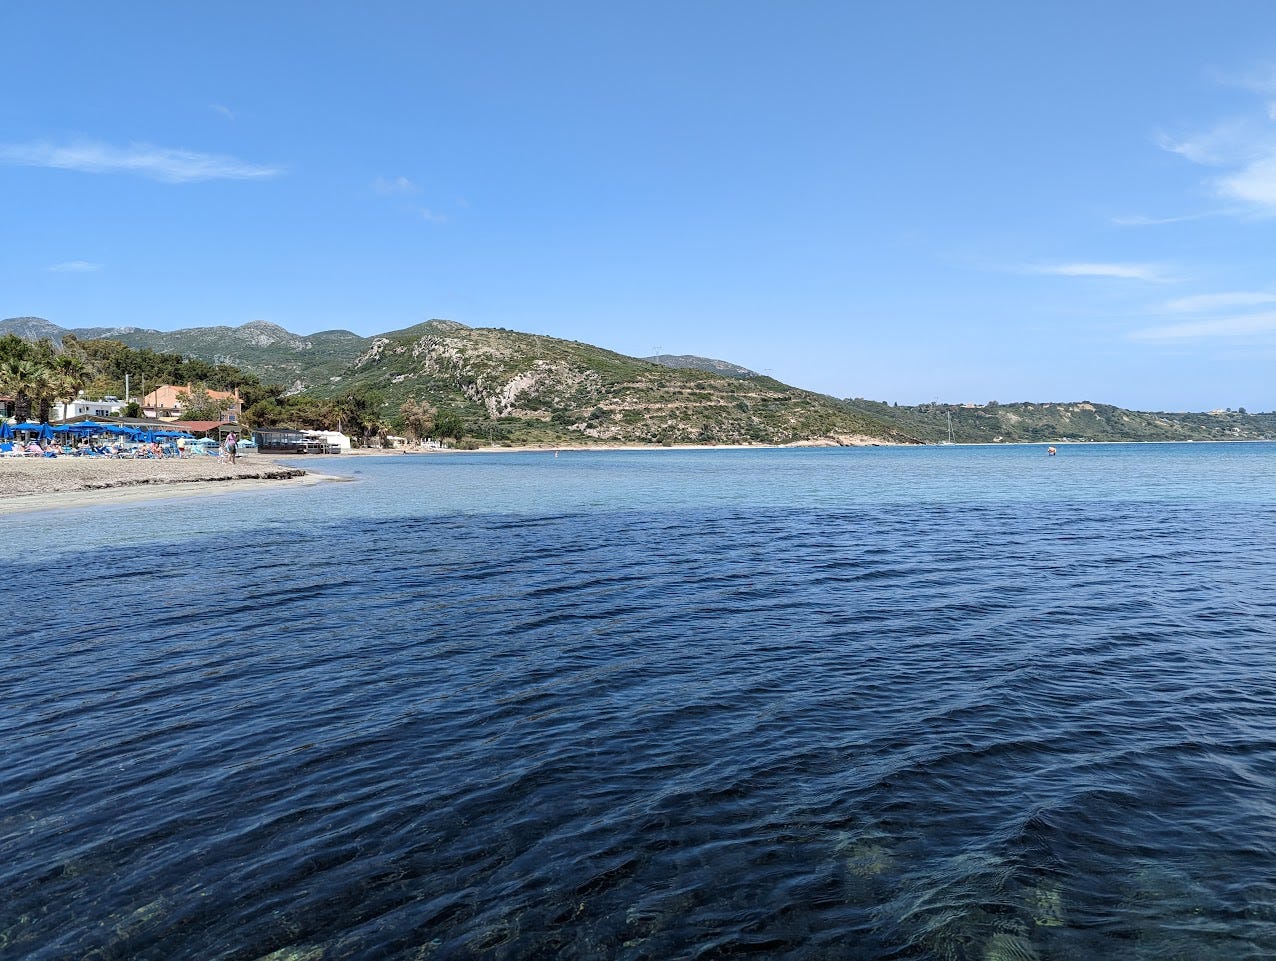 The beach at Katelios, Kefalonia, as seen from the old slipway